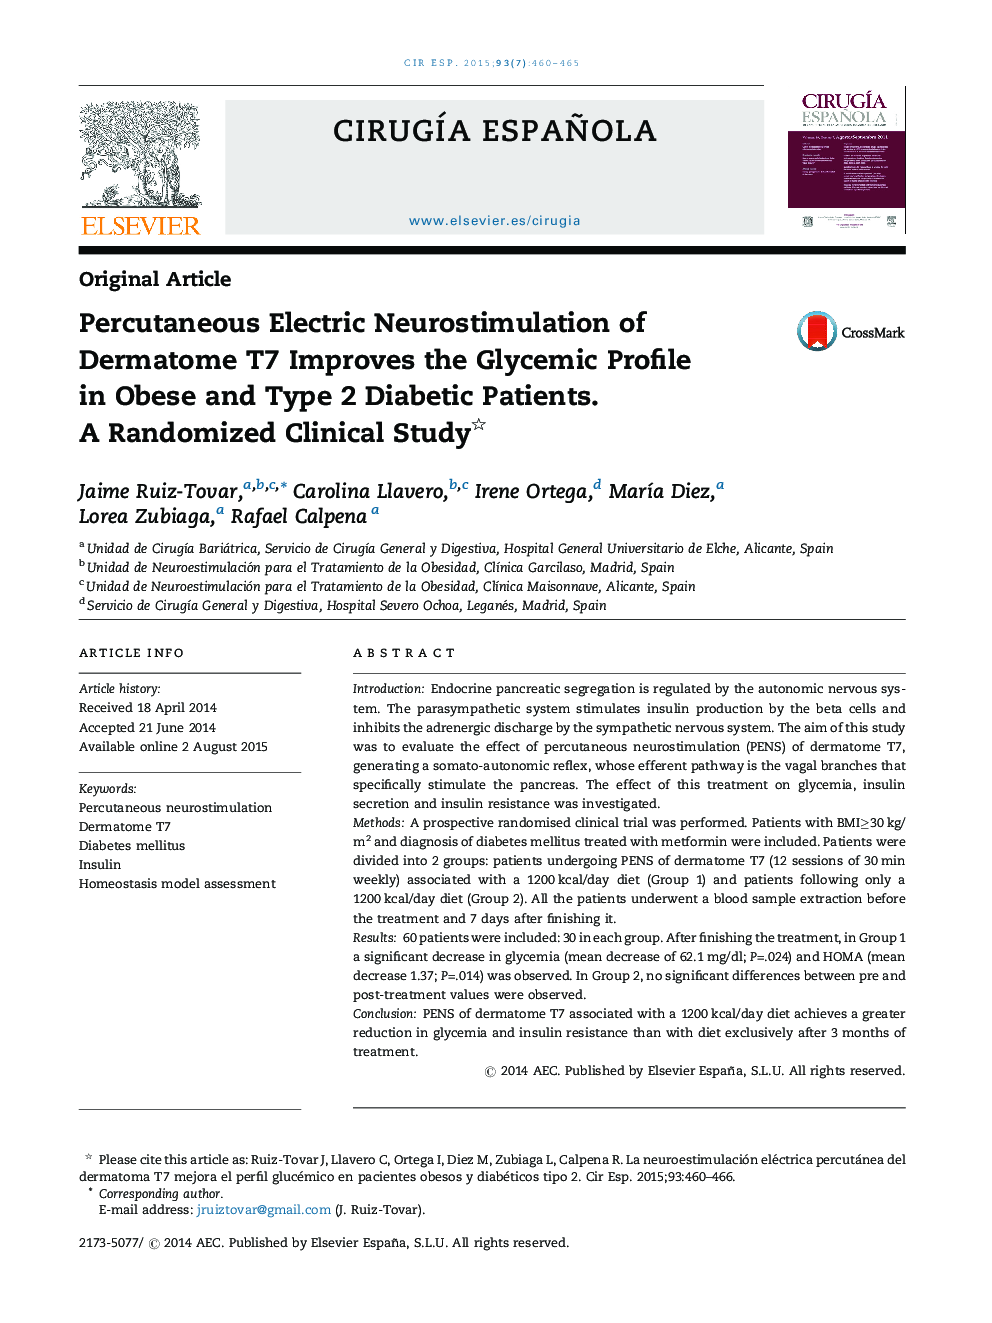 Percutaneous Electric Neurostimulation of Dermatome T7 Improves the Glycemic Profile in Obese and Type 2 Diabetic Patients. A Randomized Clinical Study 